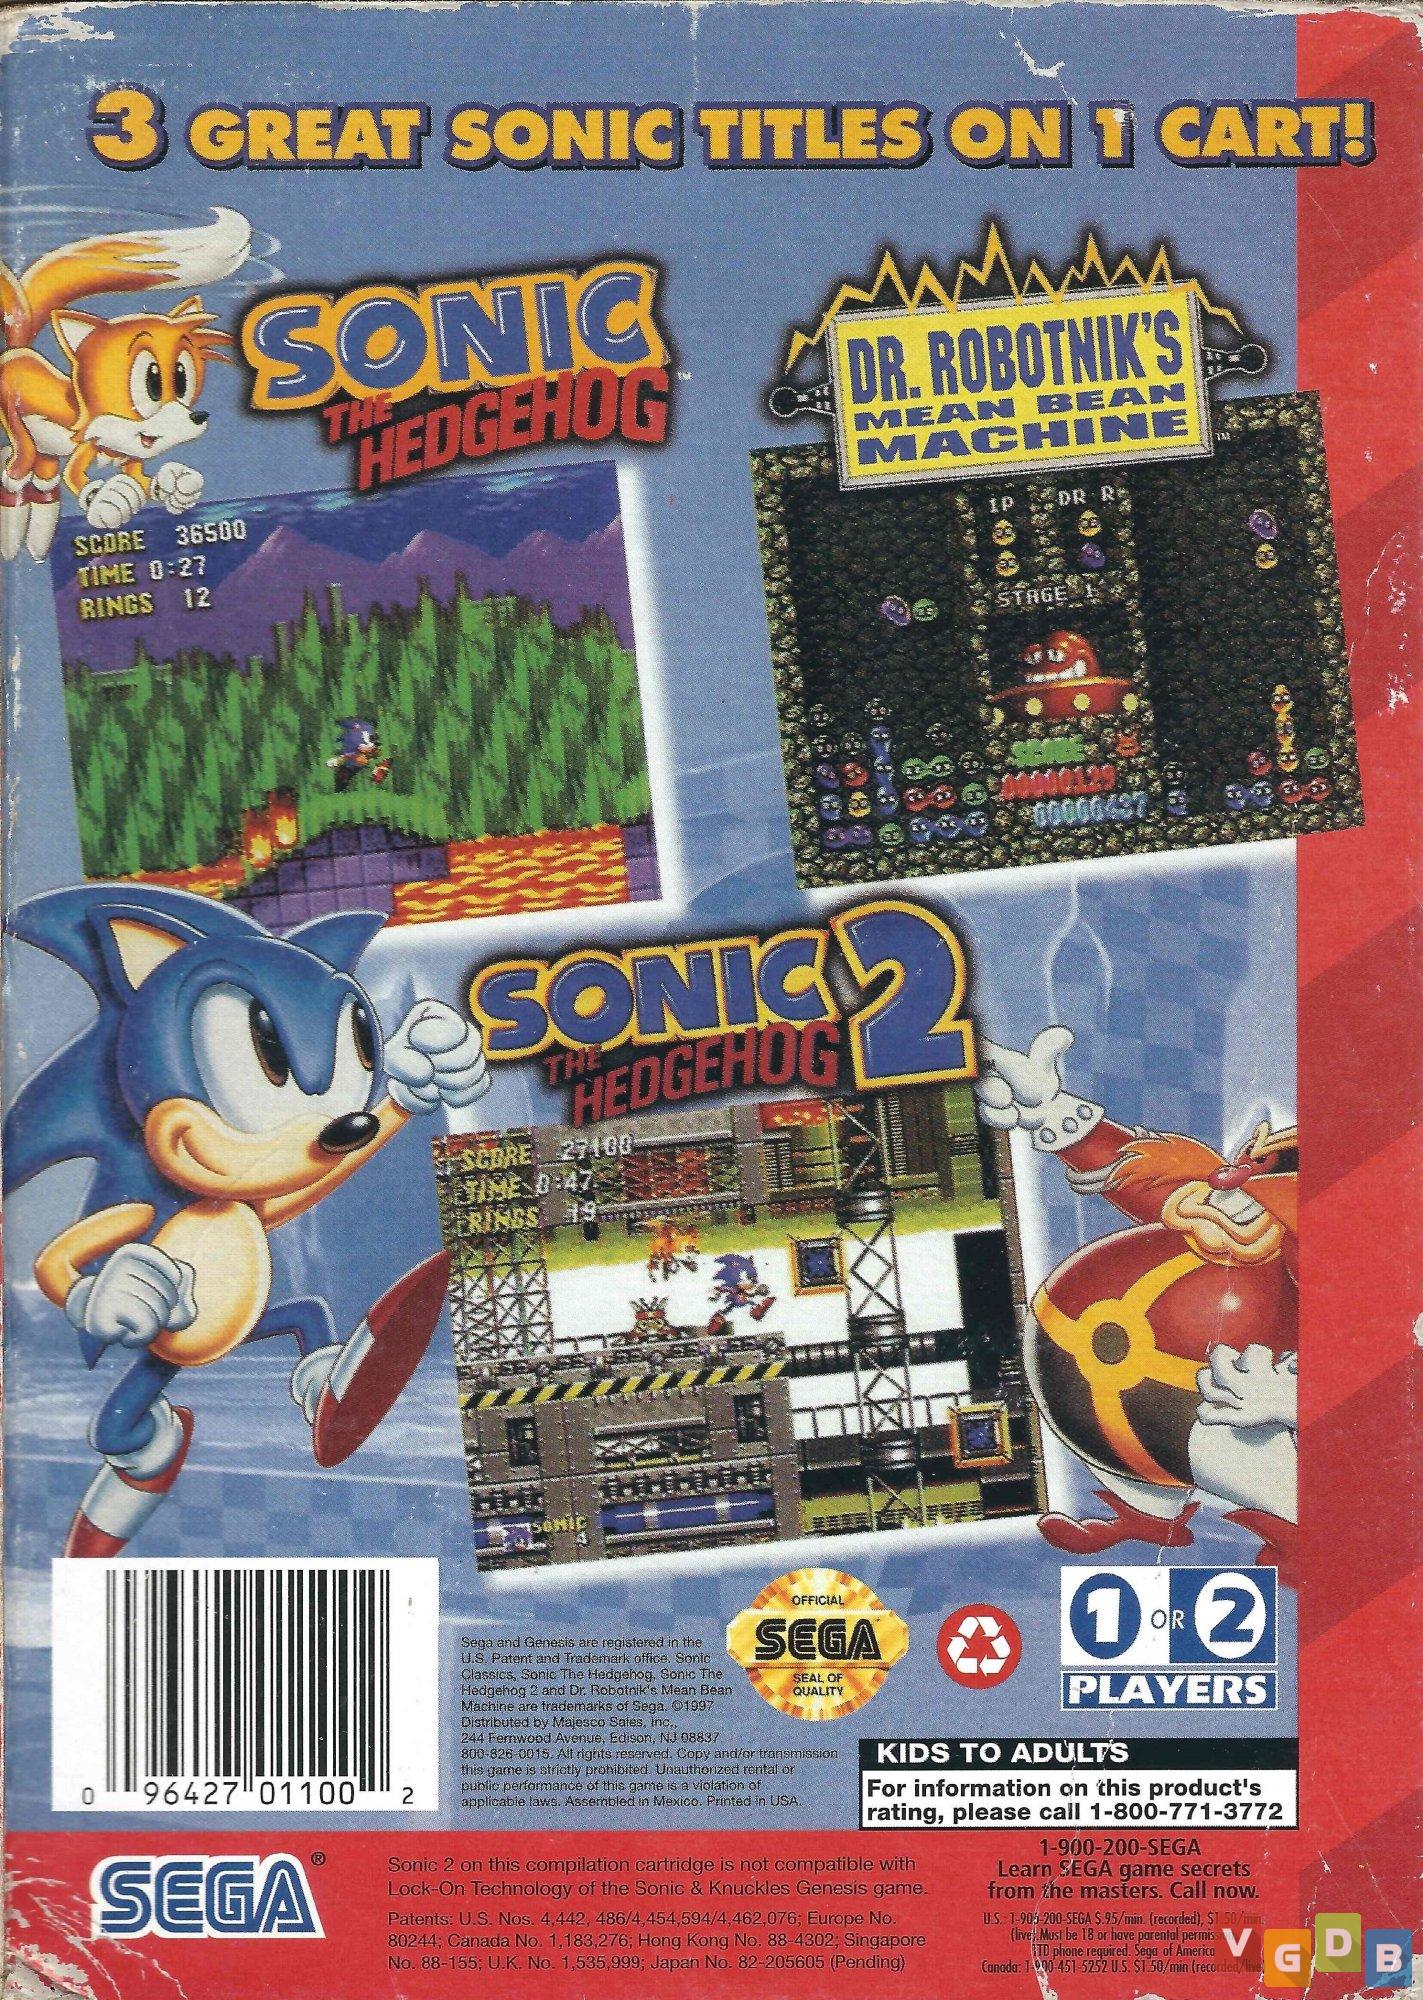 TGDB - Browse - Game - Sonic 3 & Knuckles